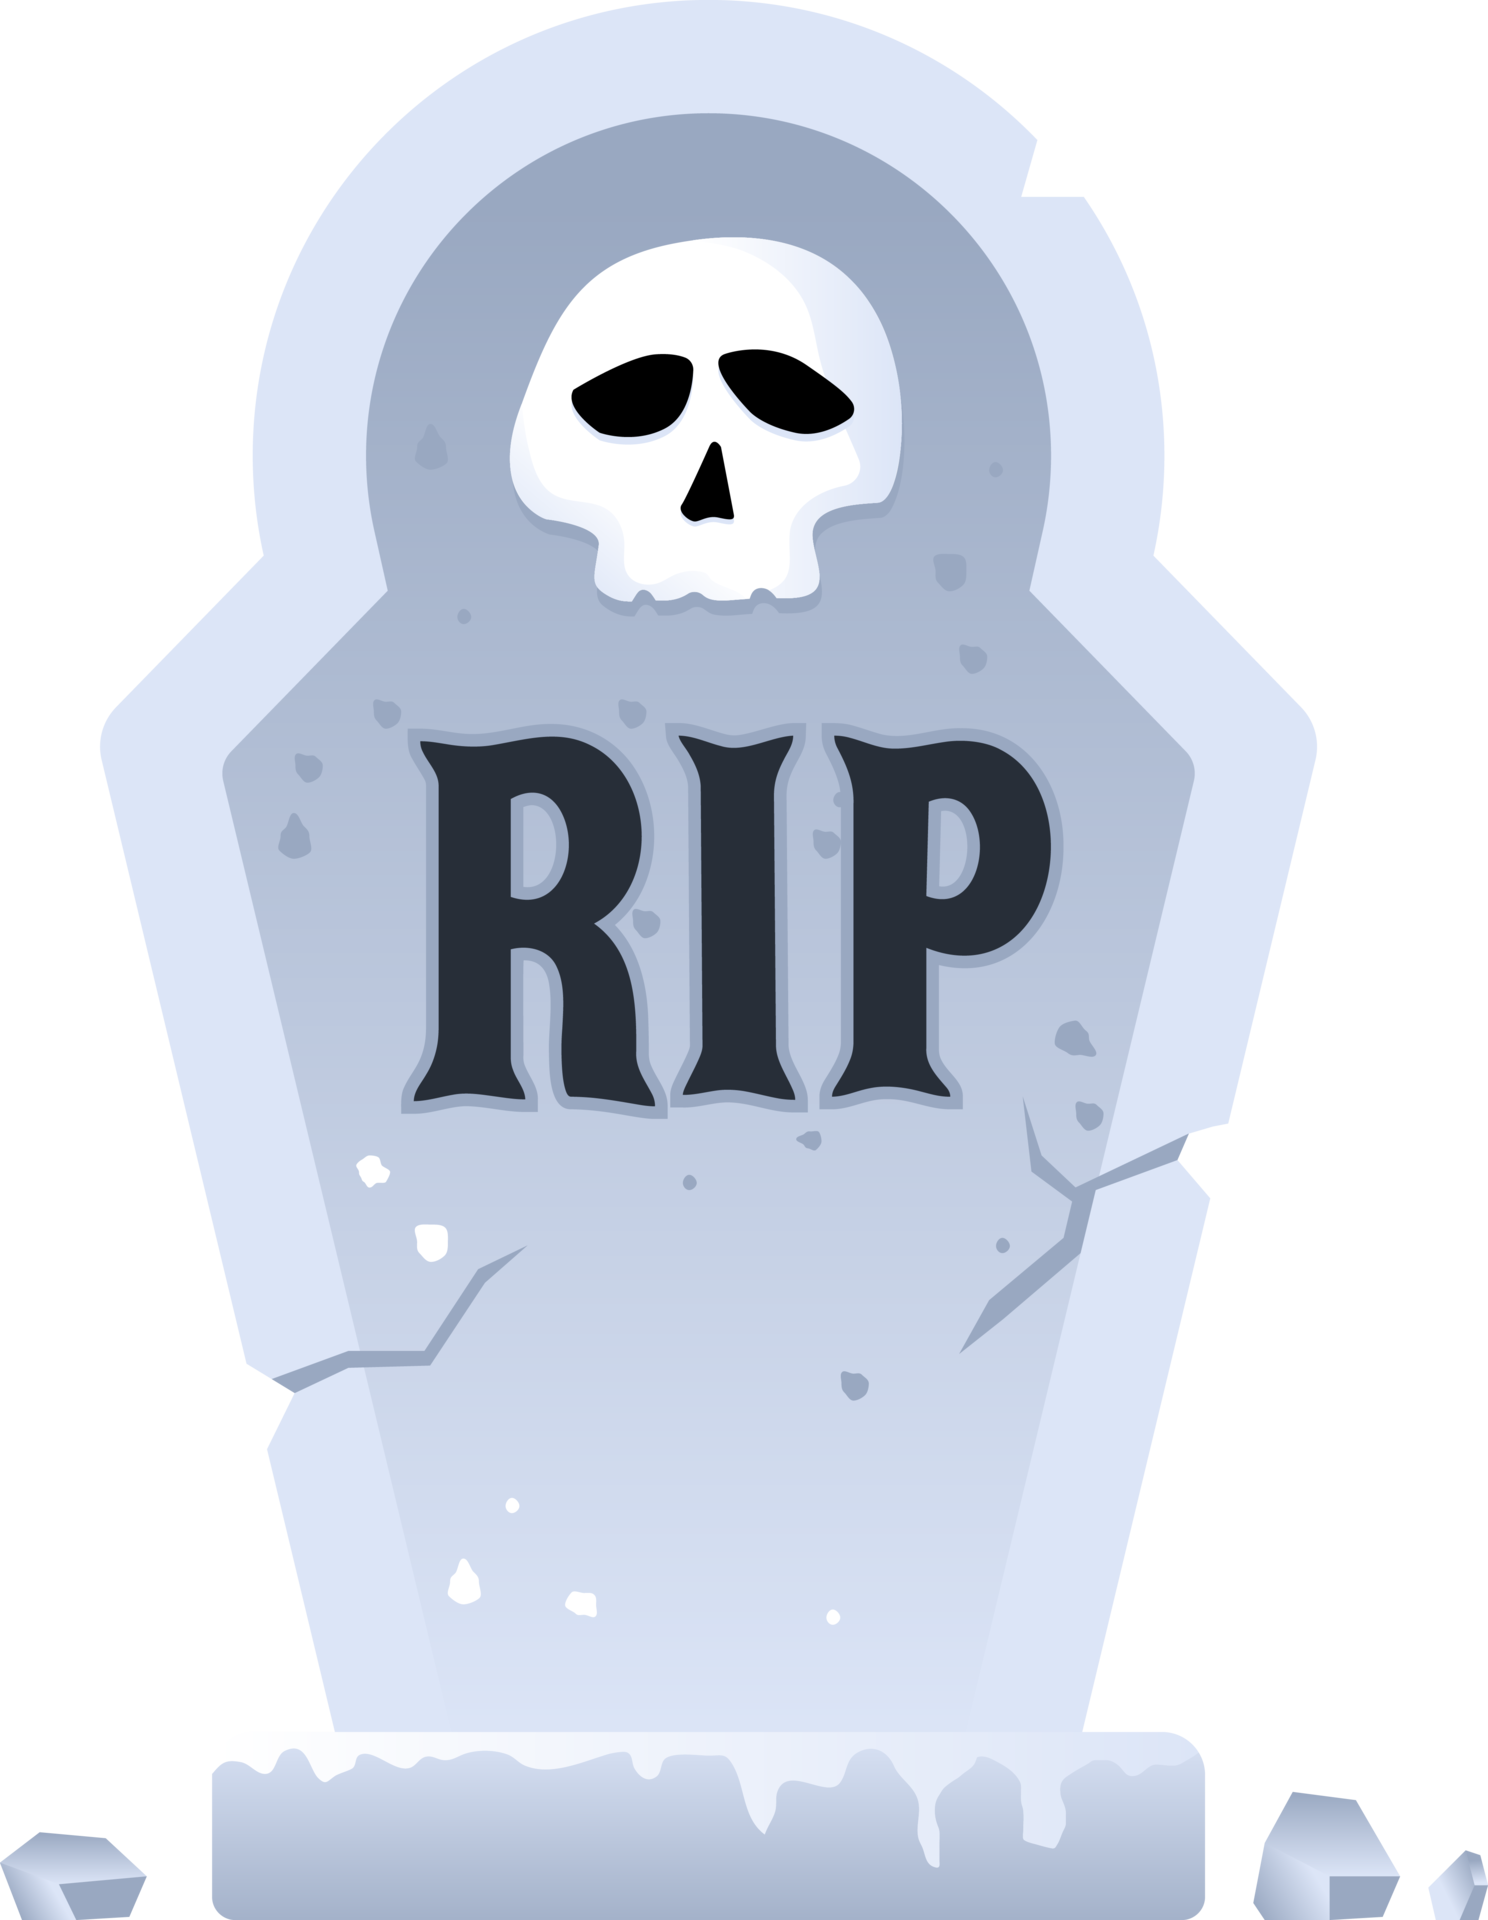 Rip png images